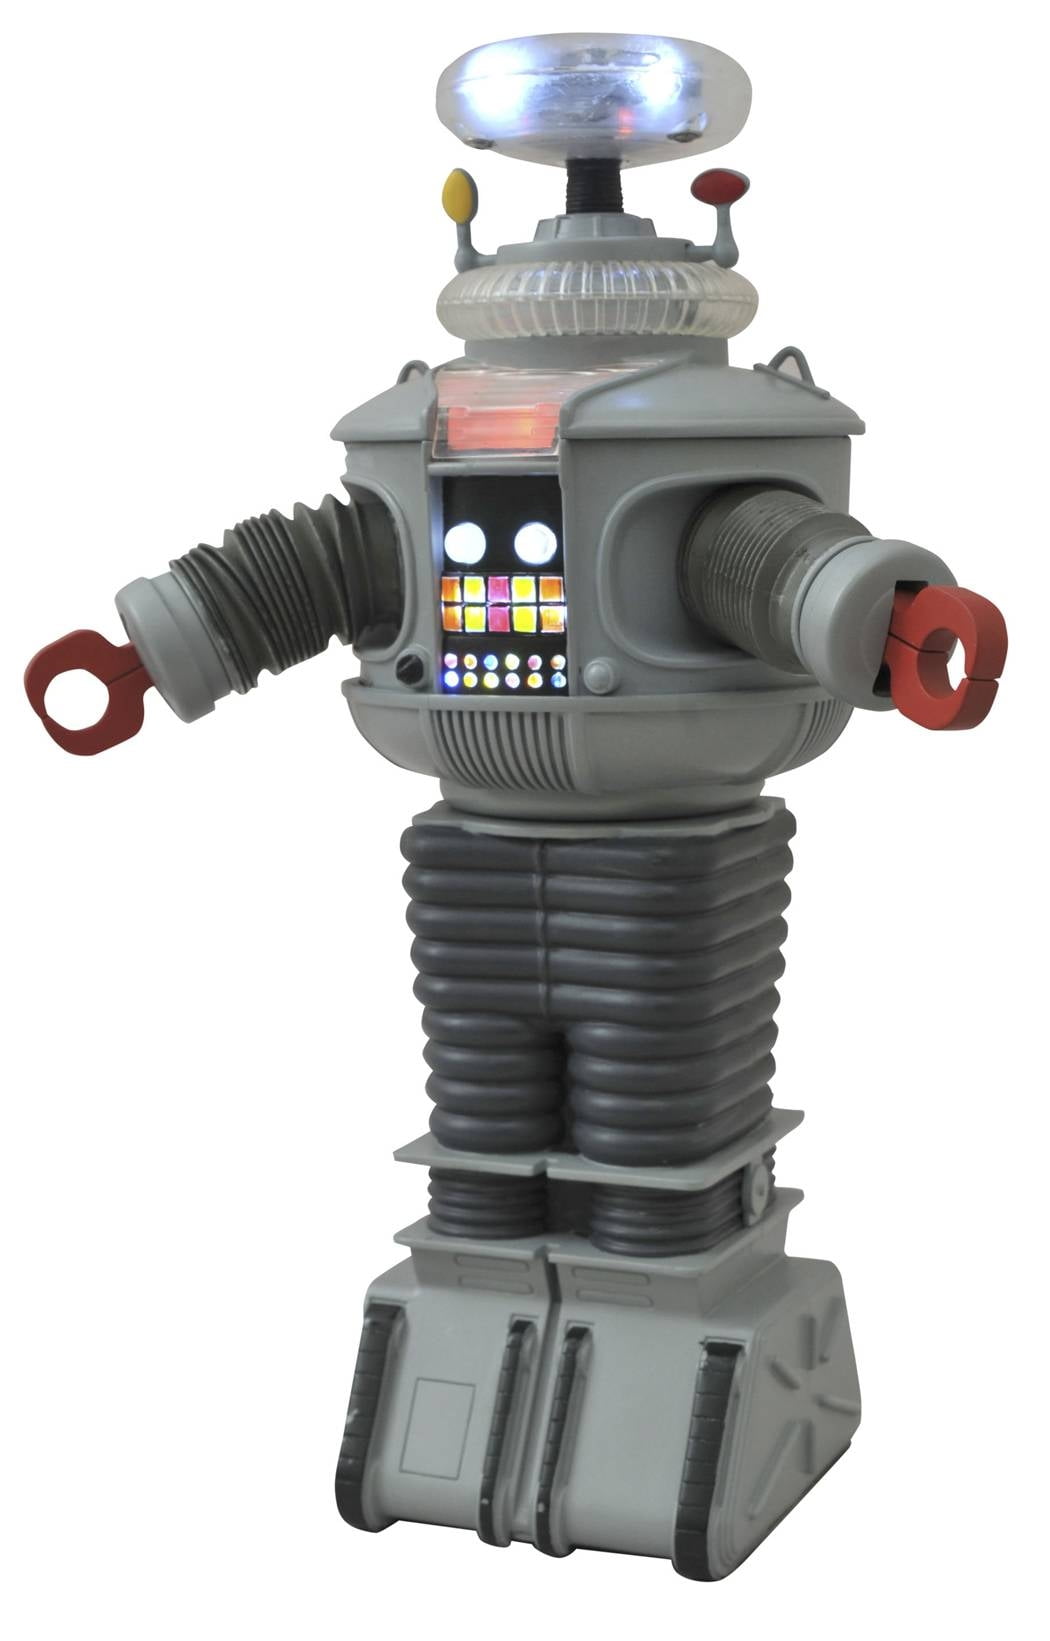 Lost in Space Electronic B-9 Robot 11" W/ Lights and Sounds Free Ship! NEW 